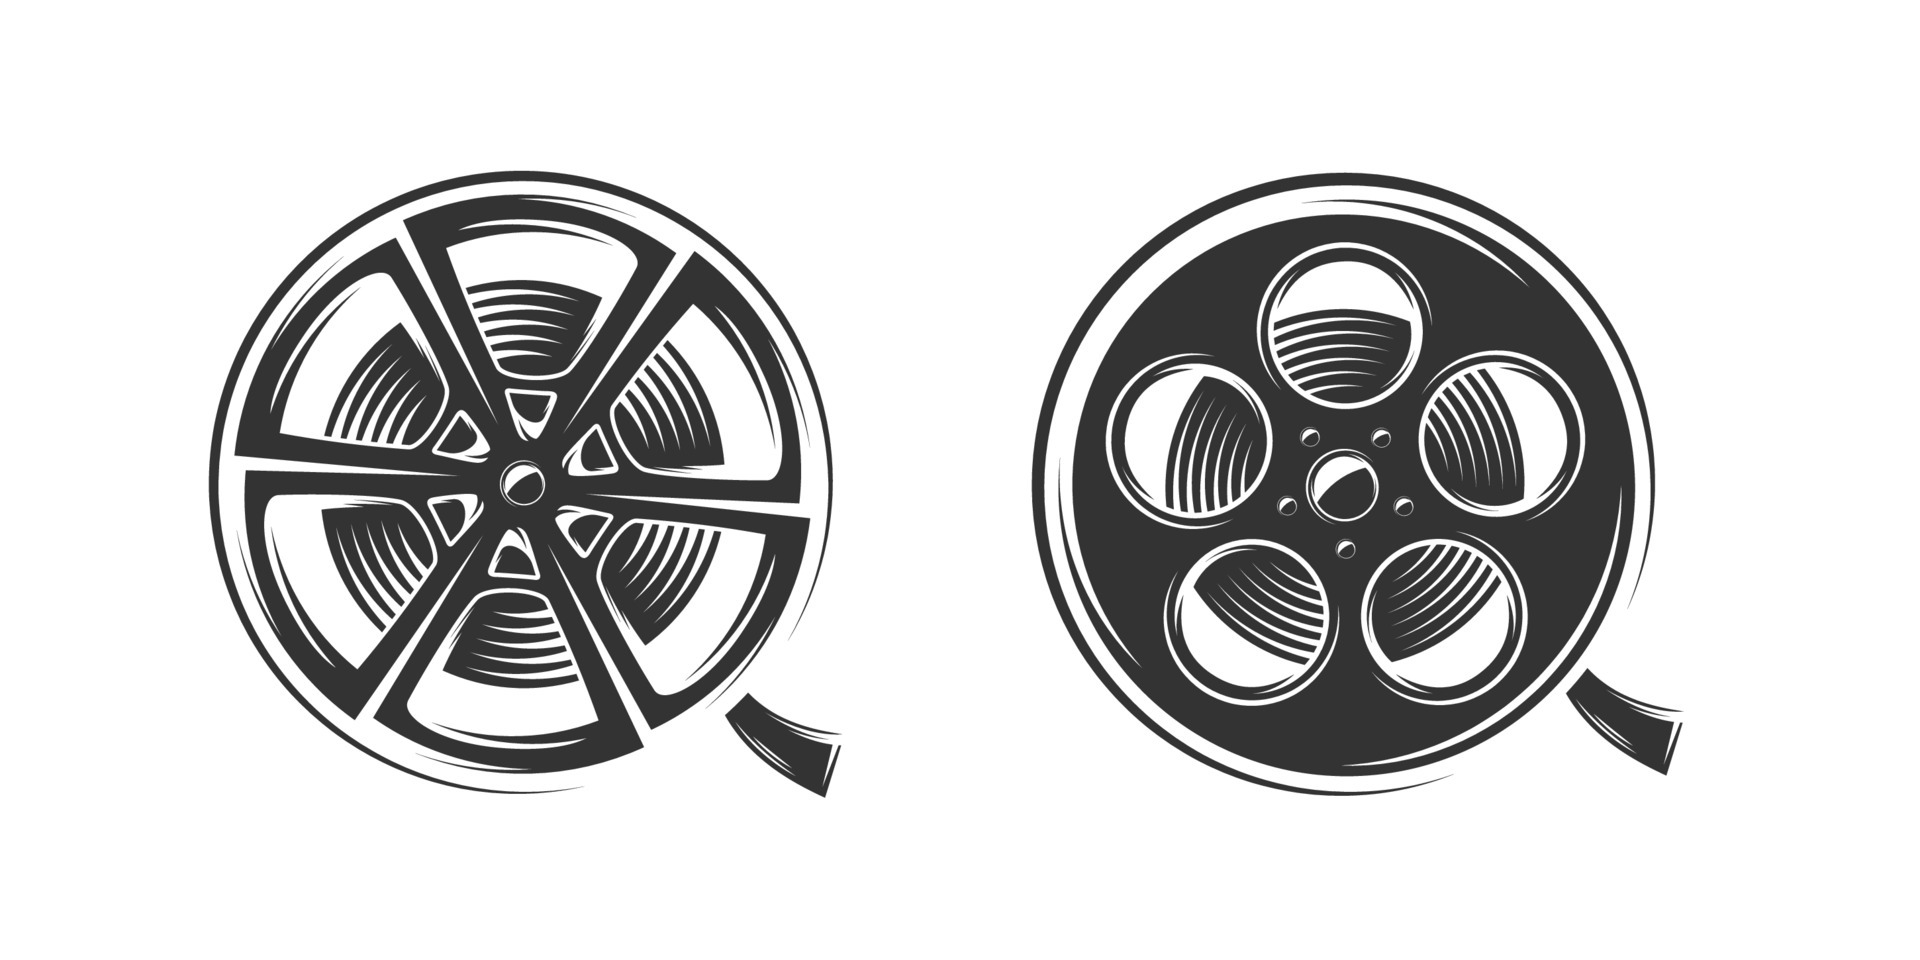 Film reels silhouette isolated on white background 6484821 Vector